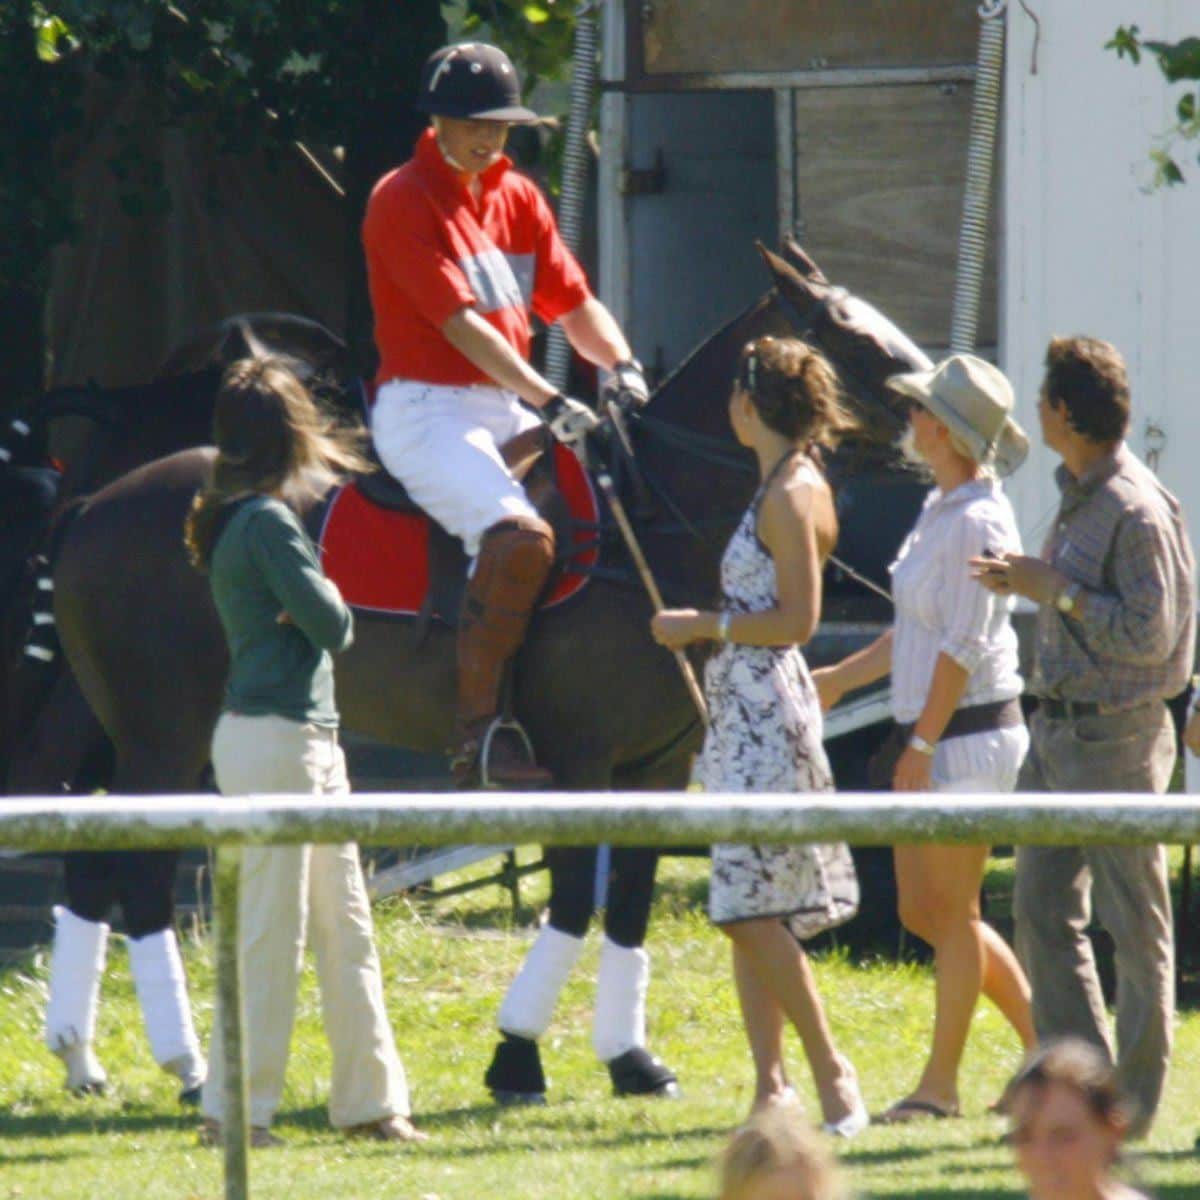 William had the support of Kate during Rundle Cup Day in 2006.